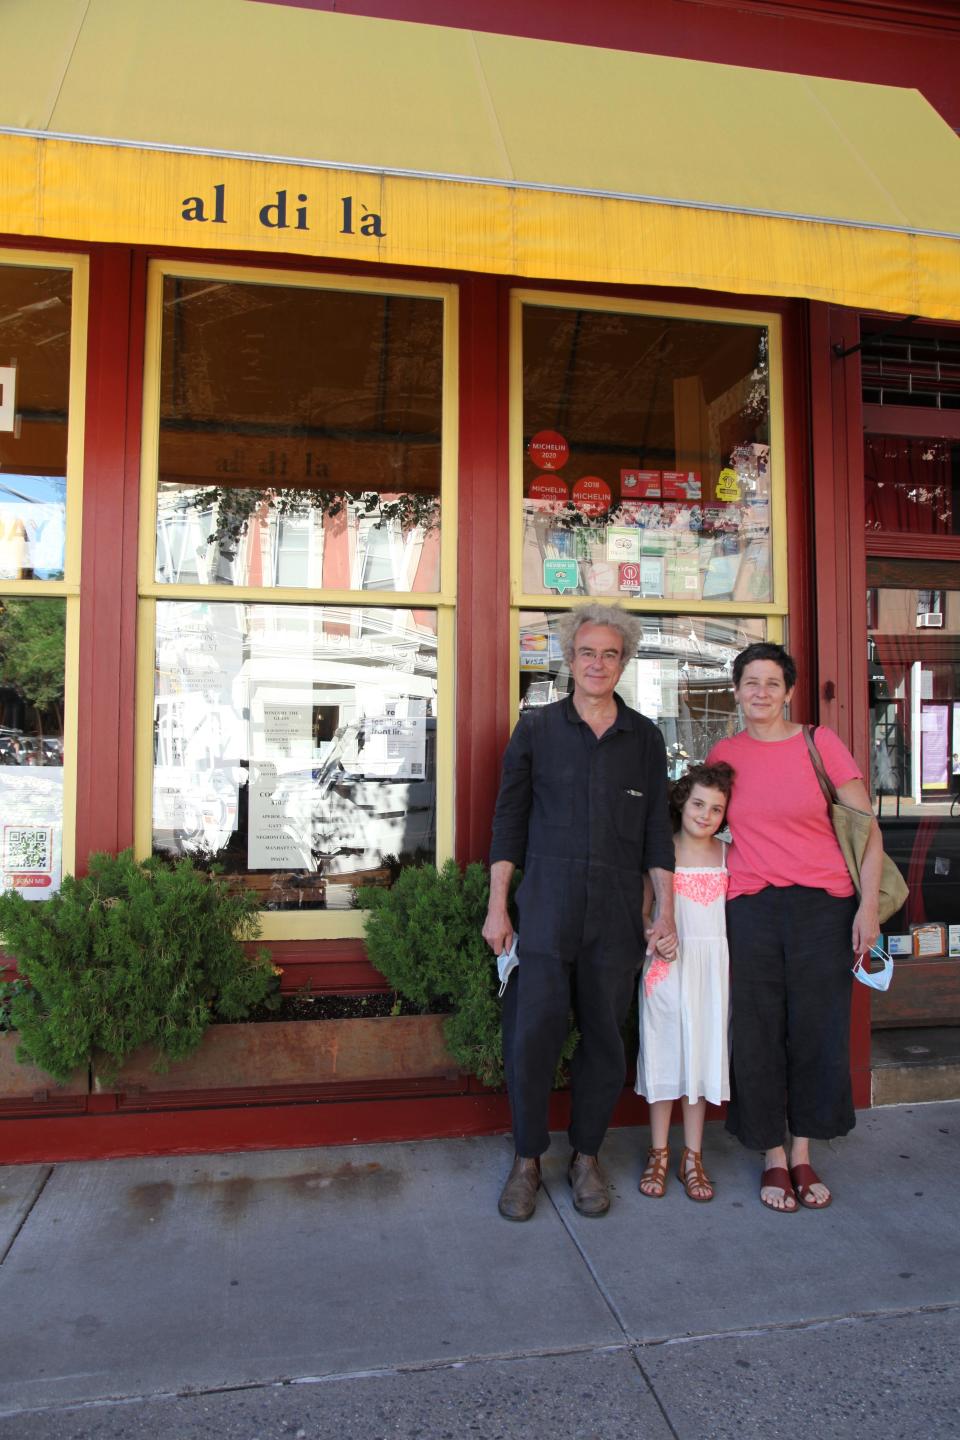 In this June 14, 2020 photo, Emiliano Coppa, left, and chef Anna Klinger pose with their daughter outside their trattoria, Al di La, in the Park Slope neighborhood in the Brooklyn borough of New York. The coronavirus has decimated the restaurant industry, leaving millions unemployed and shuttering spots for good. Many dine-in restaurants have turned to delivery or takeout, like Al di La. (Lisa Tolin via AP)